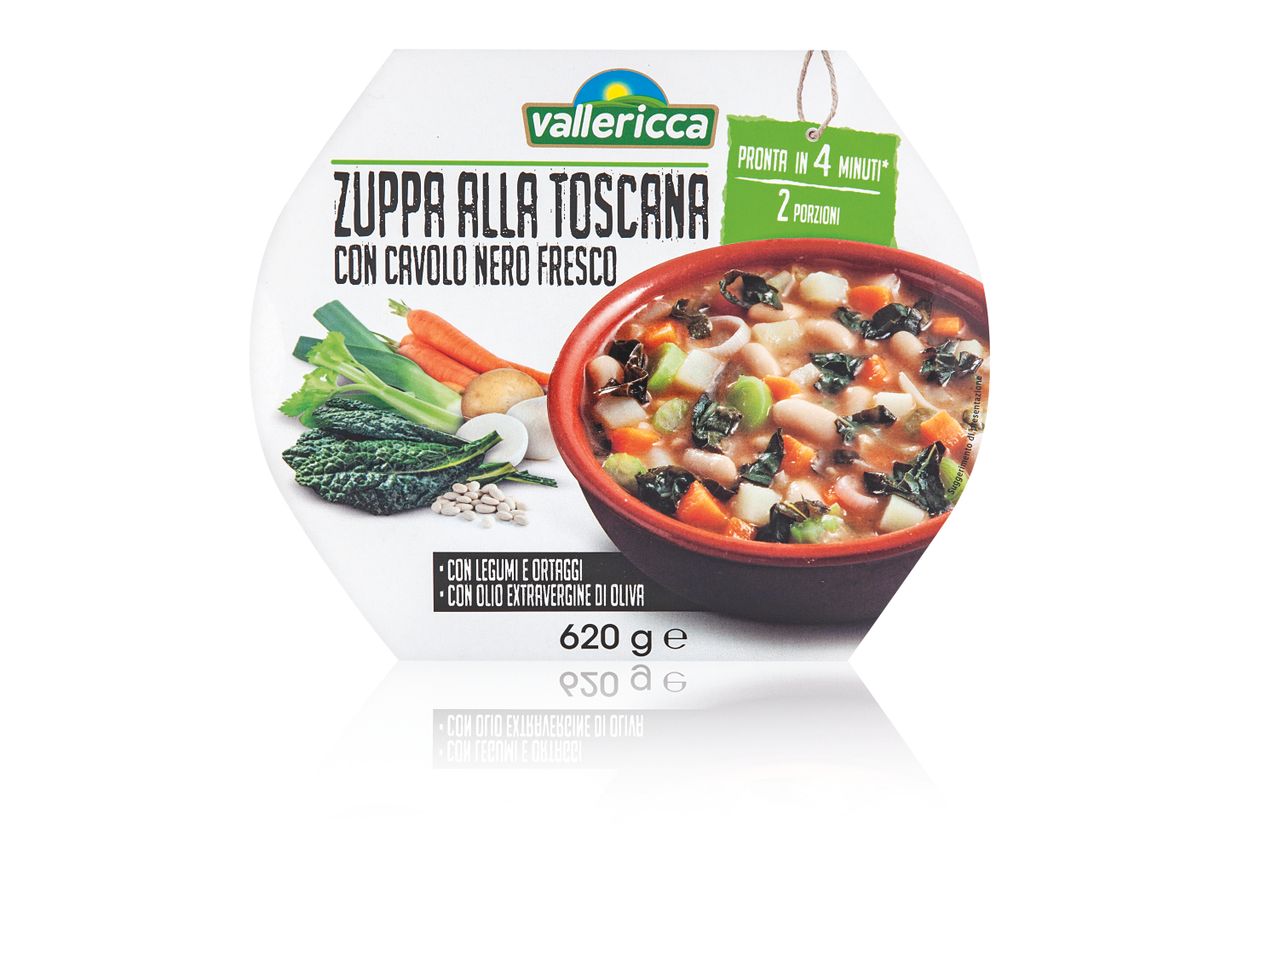 Go to full screen view: Toscana Soup - Image 1